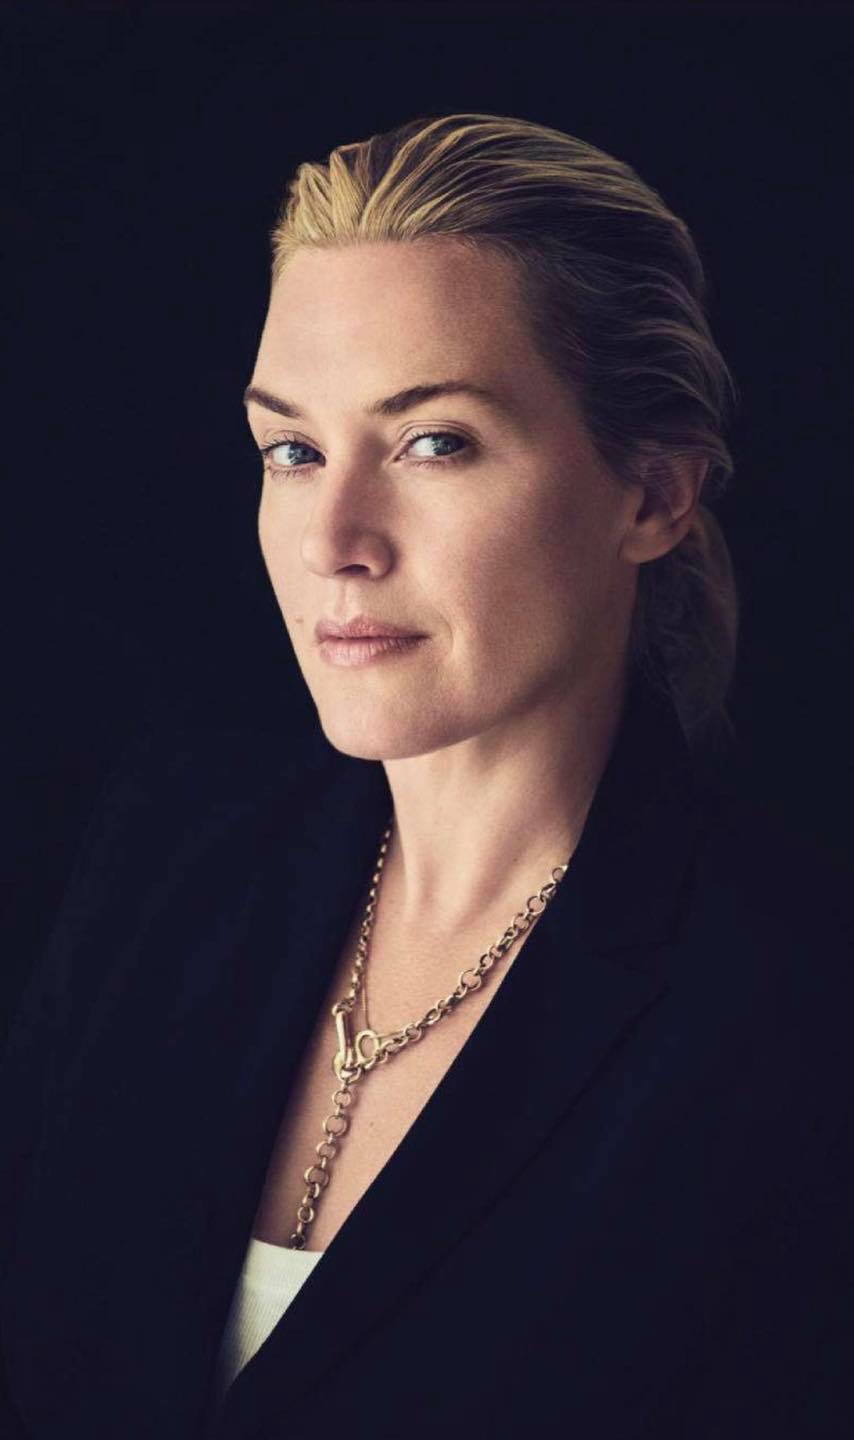 Kate Winslet disapproves Blank Meme Template